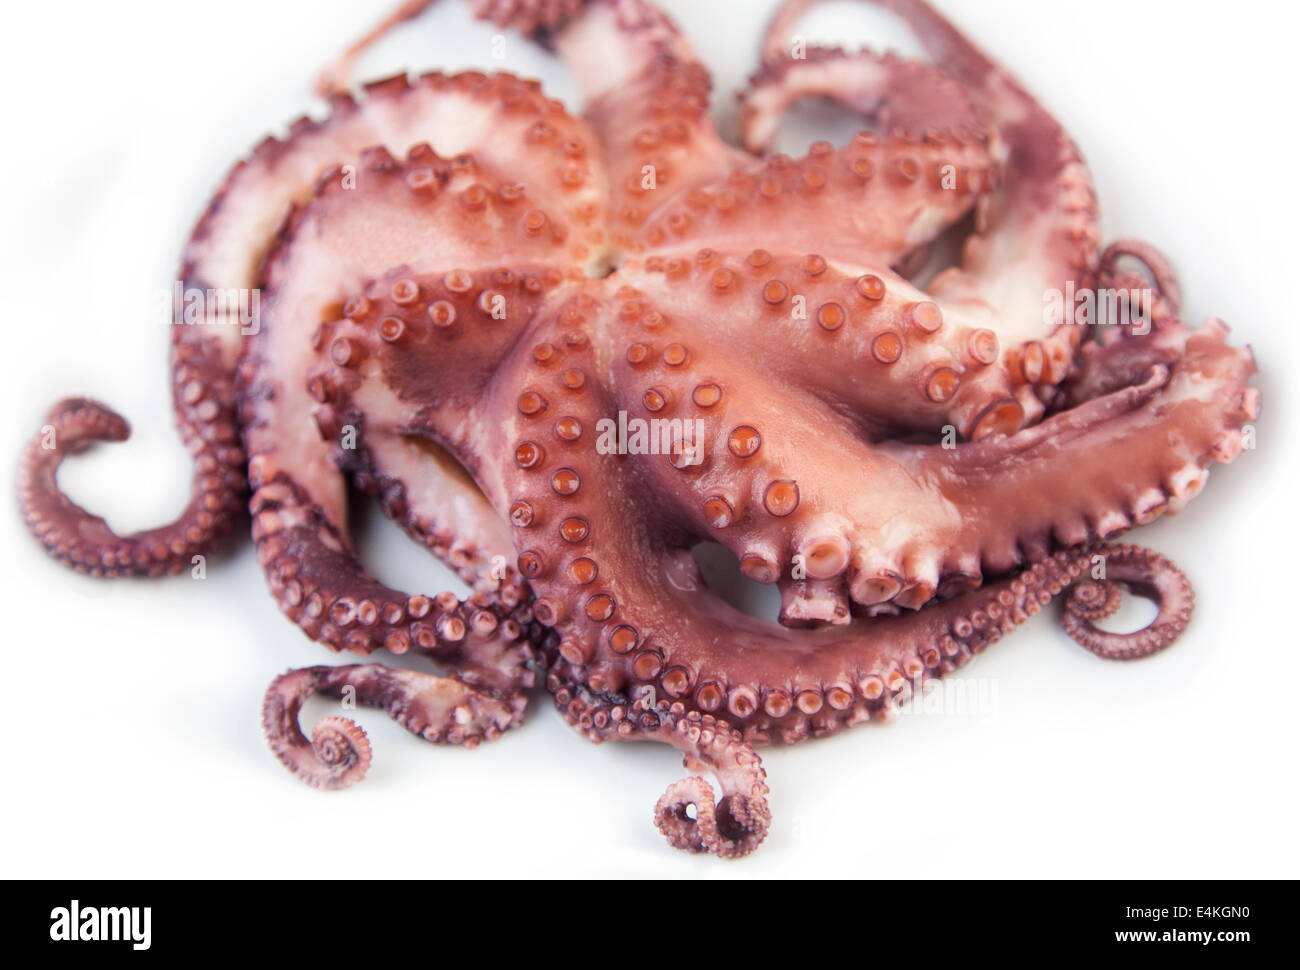 Boiled cctopus on white background Stock Photo